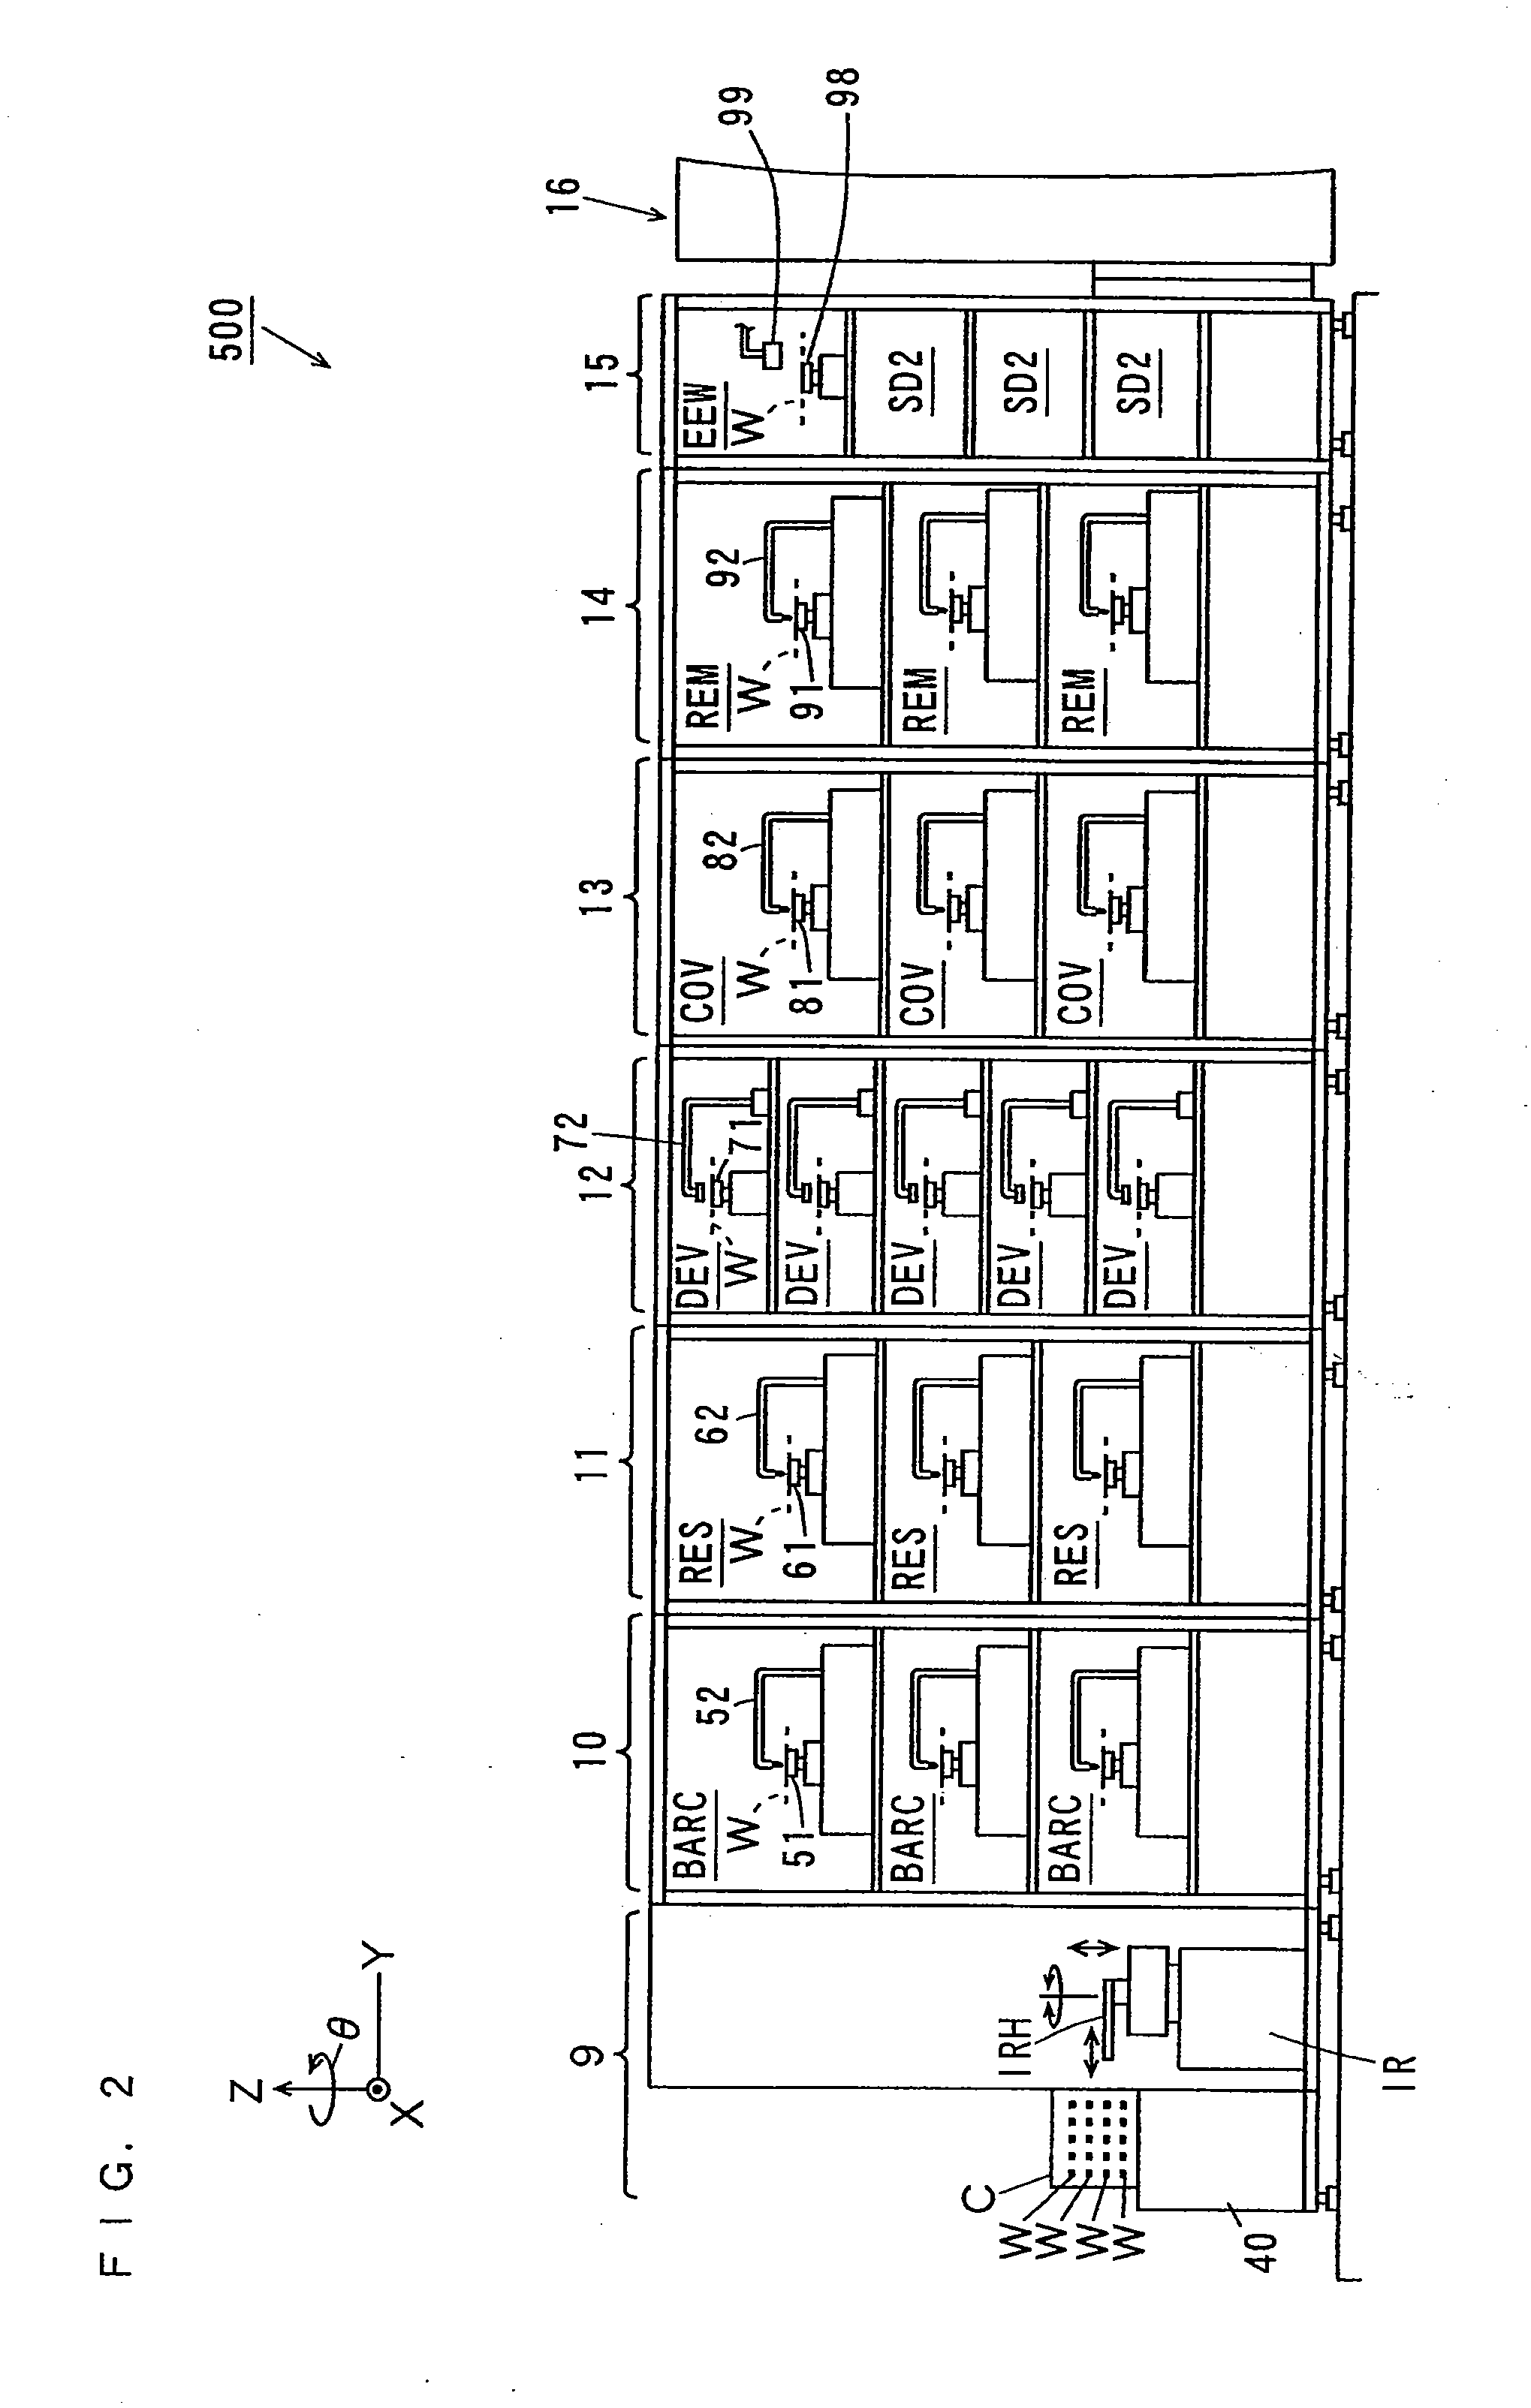 Substrate cleaning and processing apparatus with magnetically controlled spin chuck holding pins